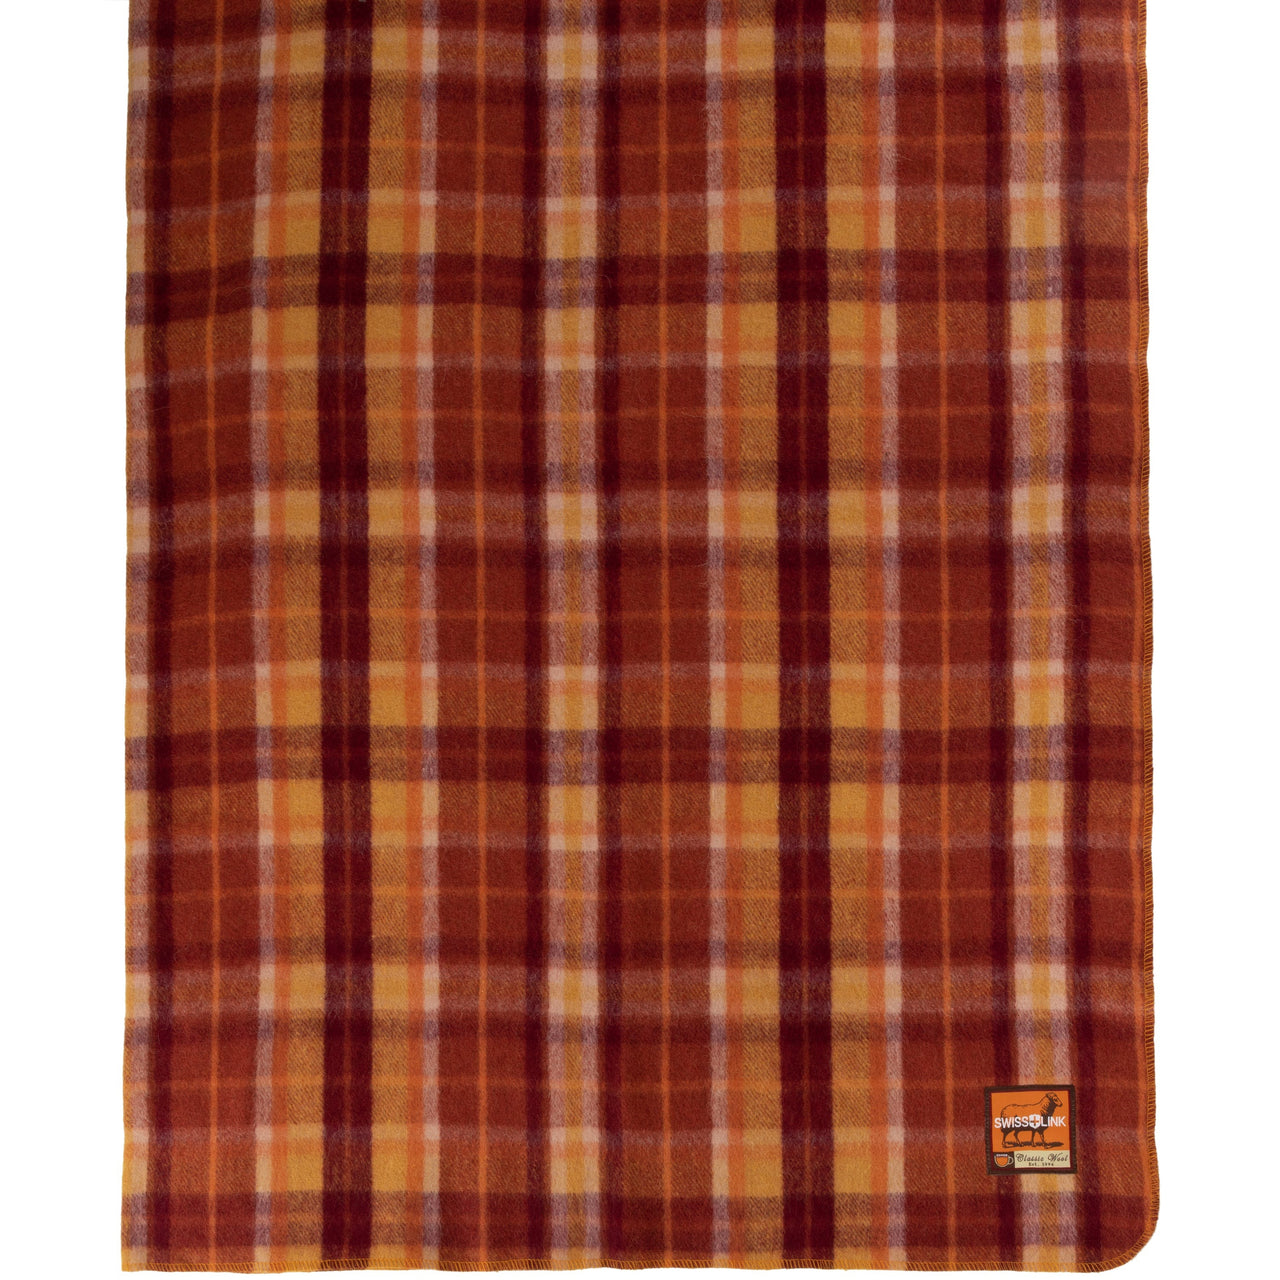 Fall into Autumn Classic Wool Blanket